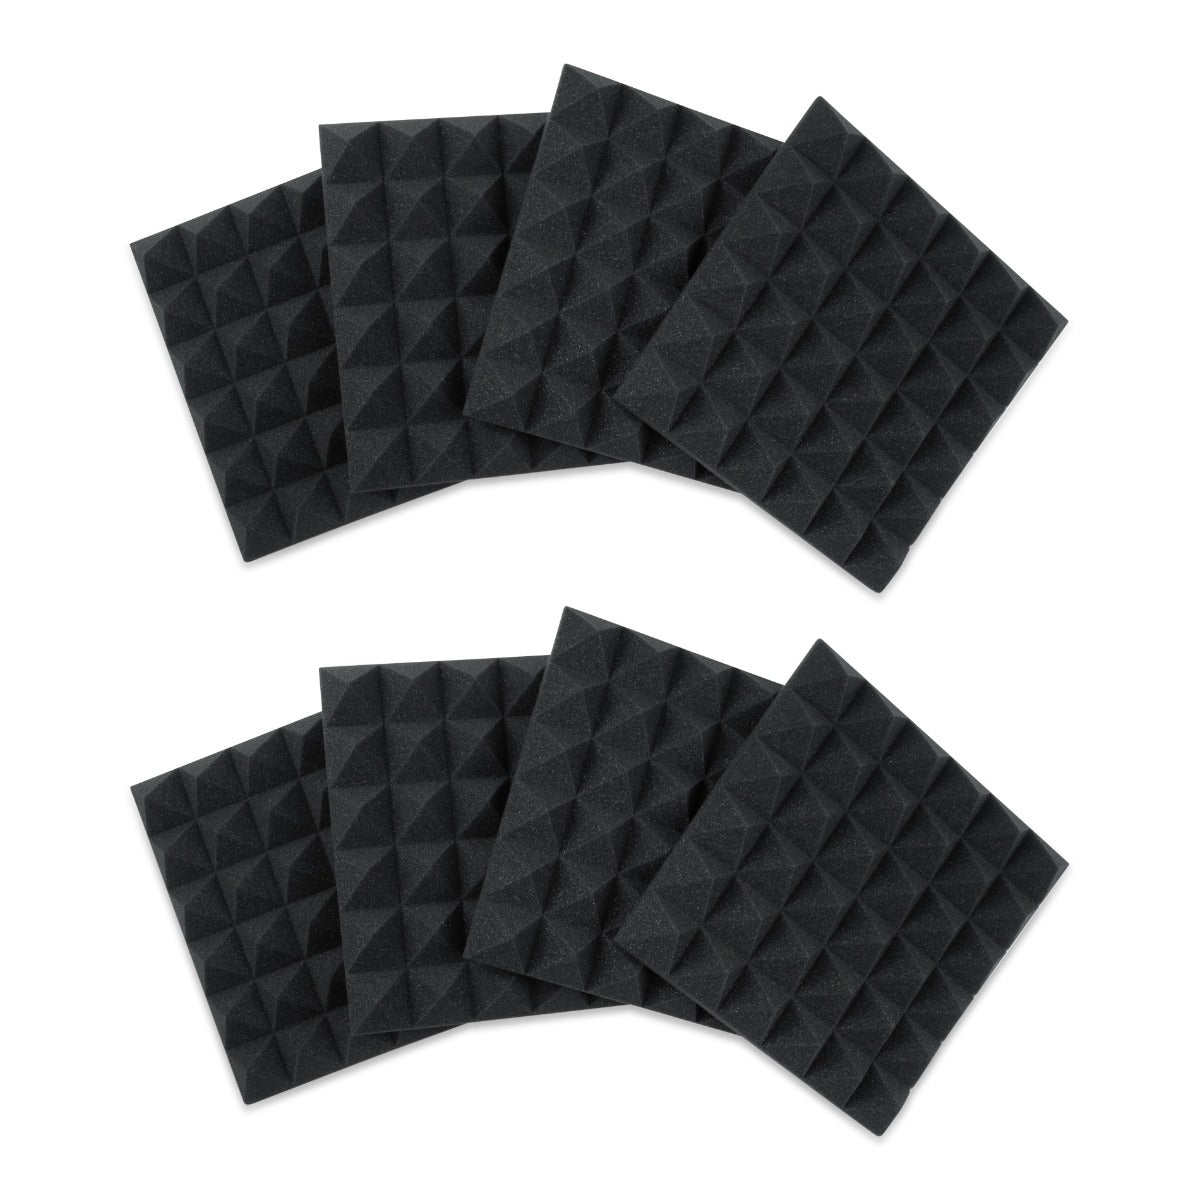 Collective image of the Gator Frameworks 8 Pack of 12x12" Acoustic Pyramid Panels - Charcoal